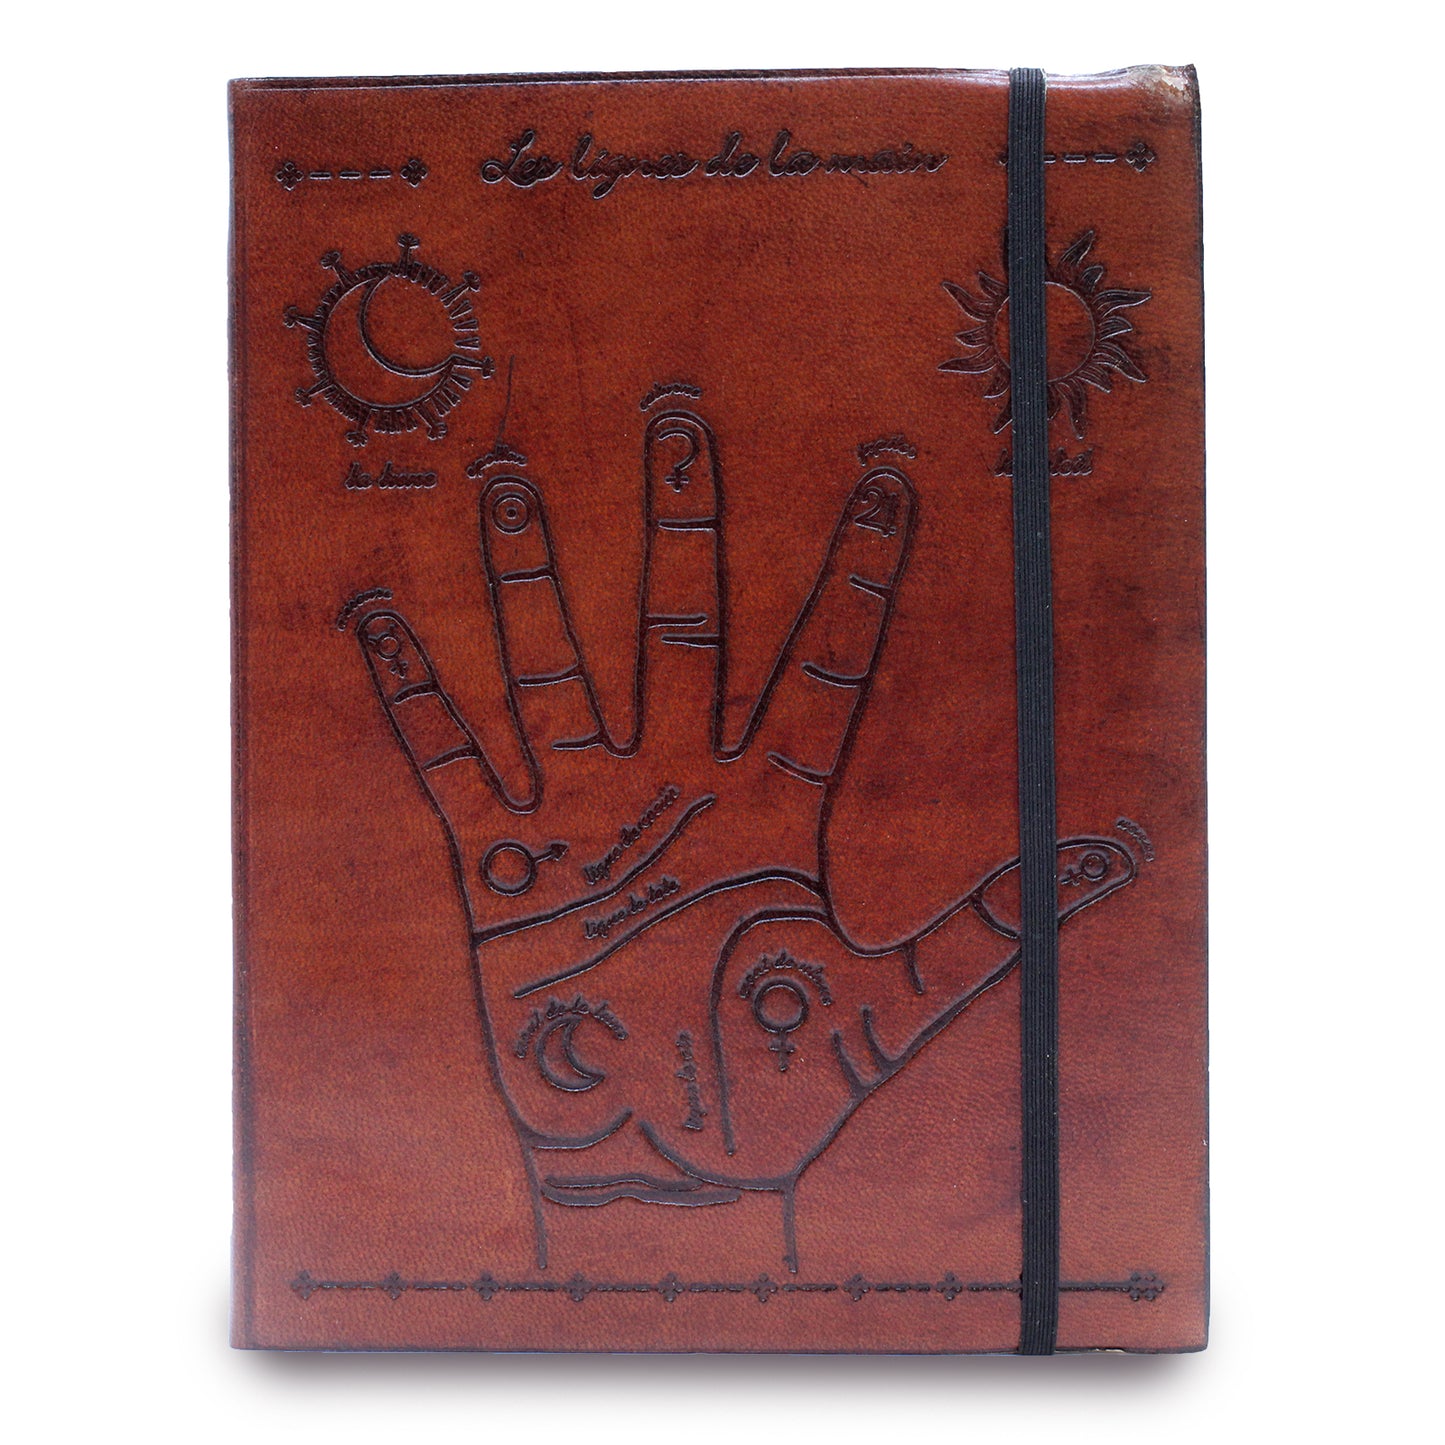 Vegetable Tanned Leather Notebooks